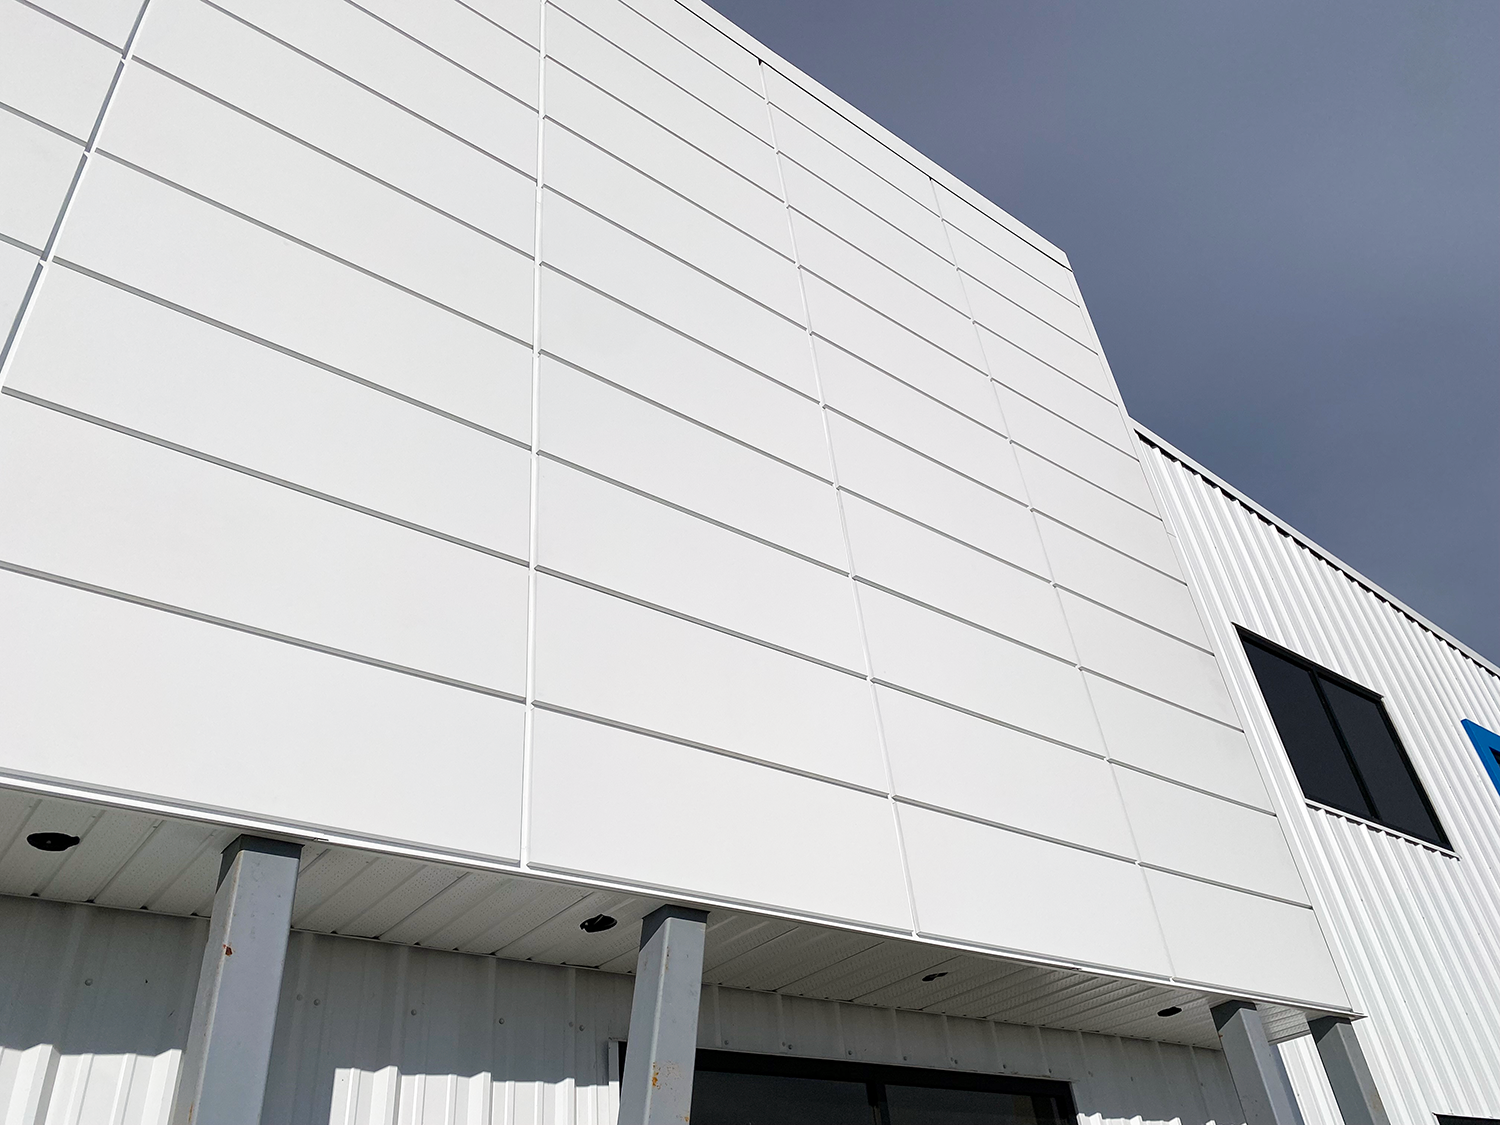 Commercial Building with Expand Panels in Textured Arctic White